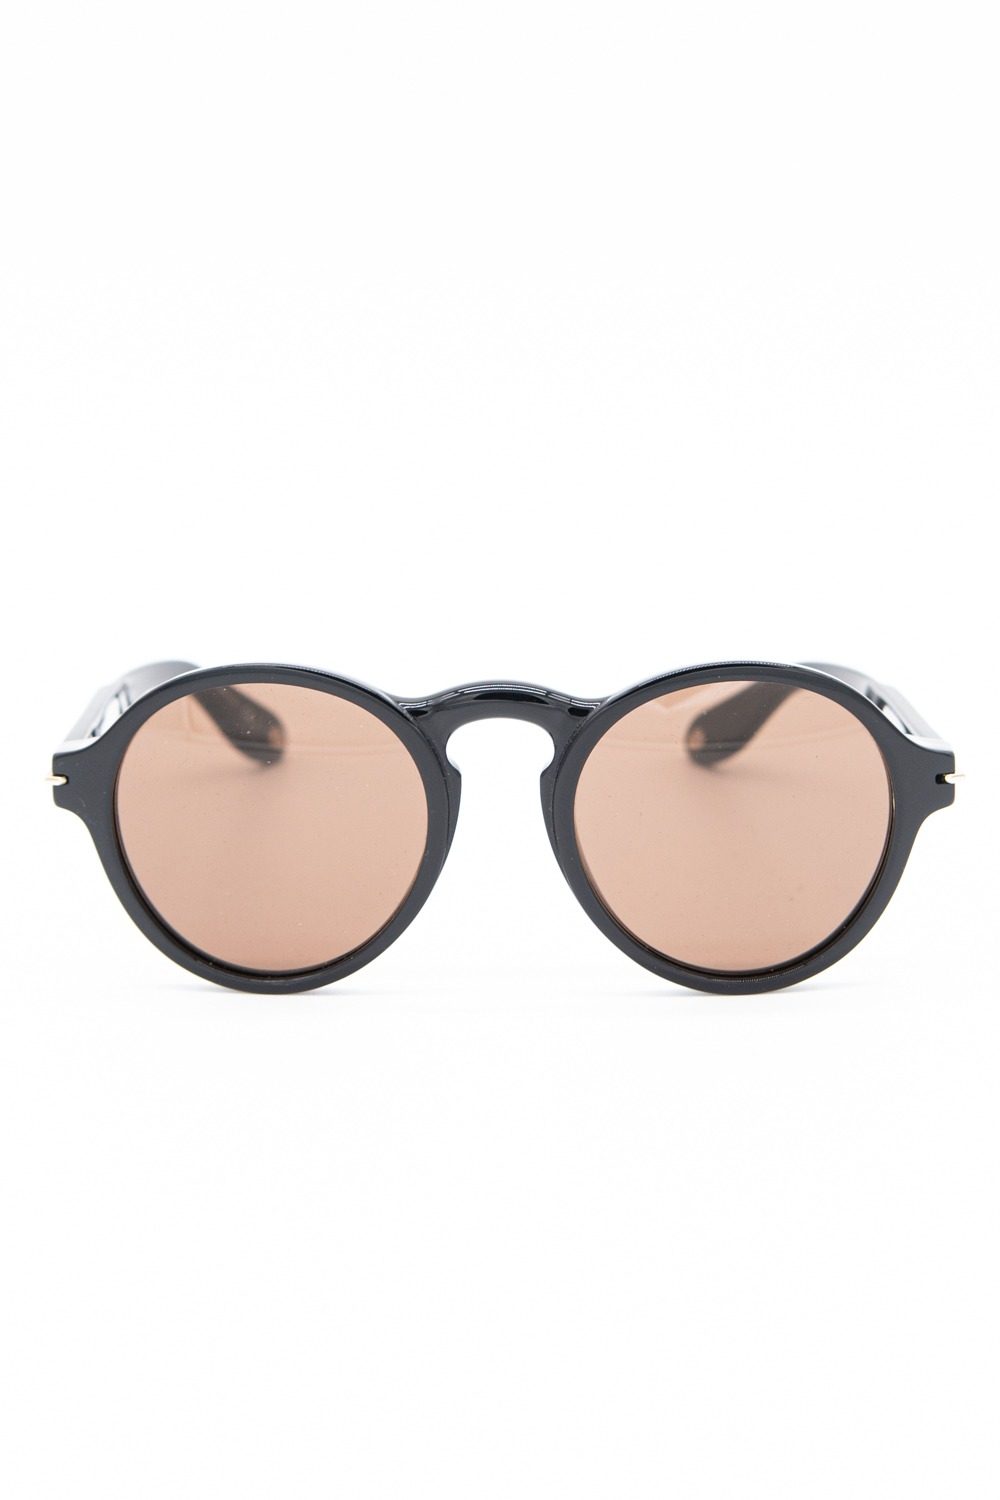 Thumbnail of http://Givenchy%20Sonnenbrille%20in%20Schwarz